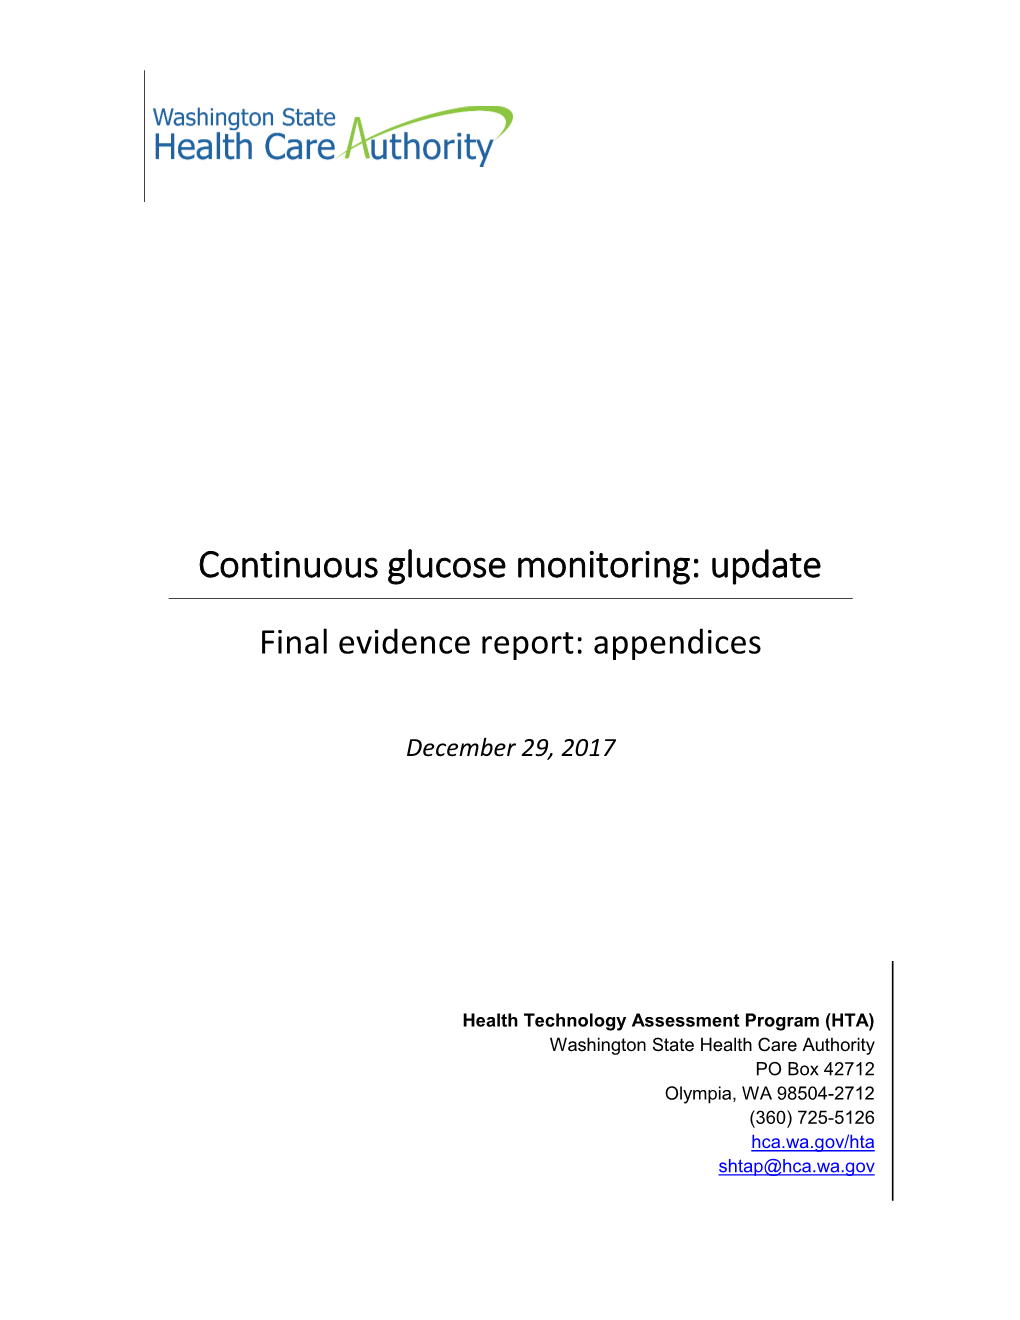 Continuous Glucose Monitoring: Update